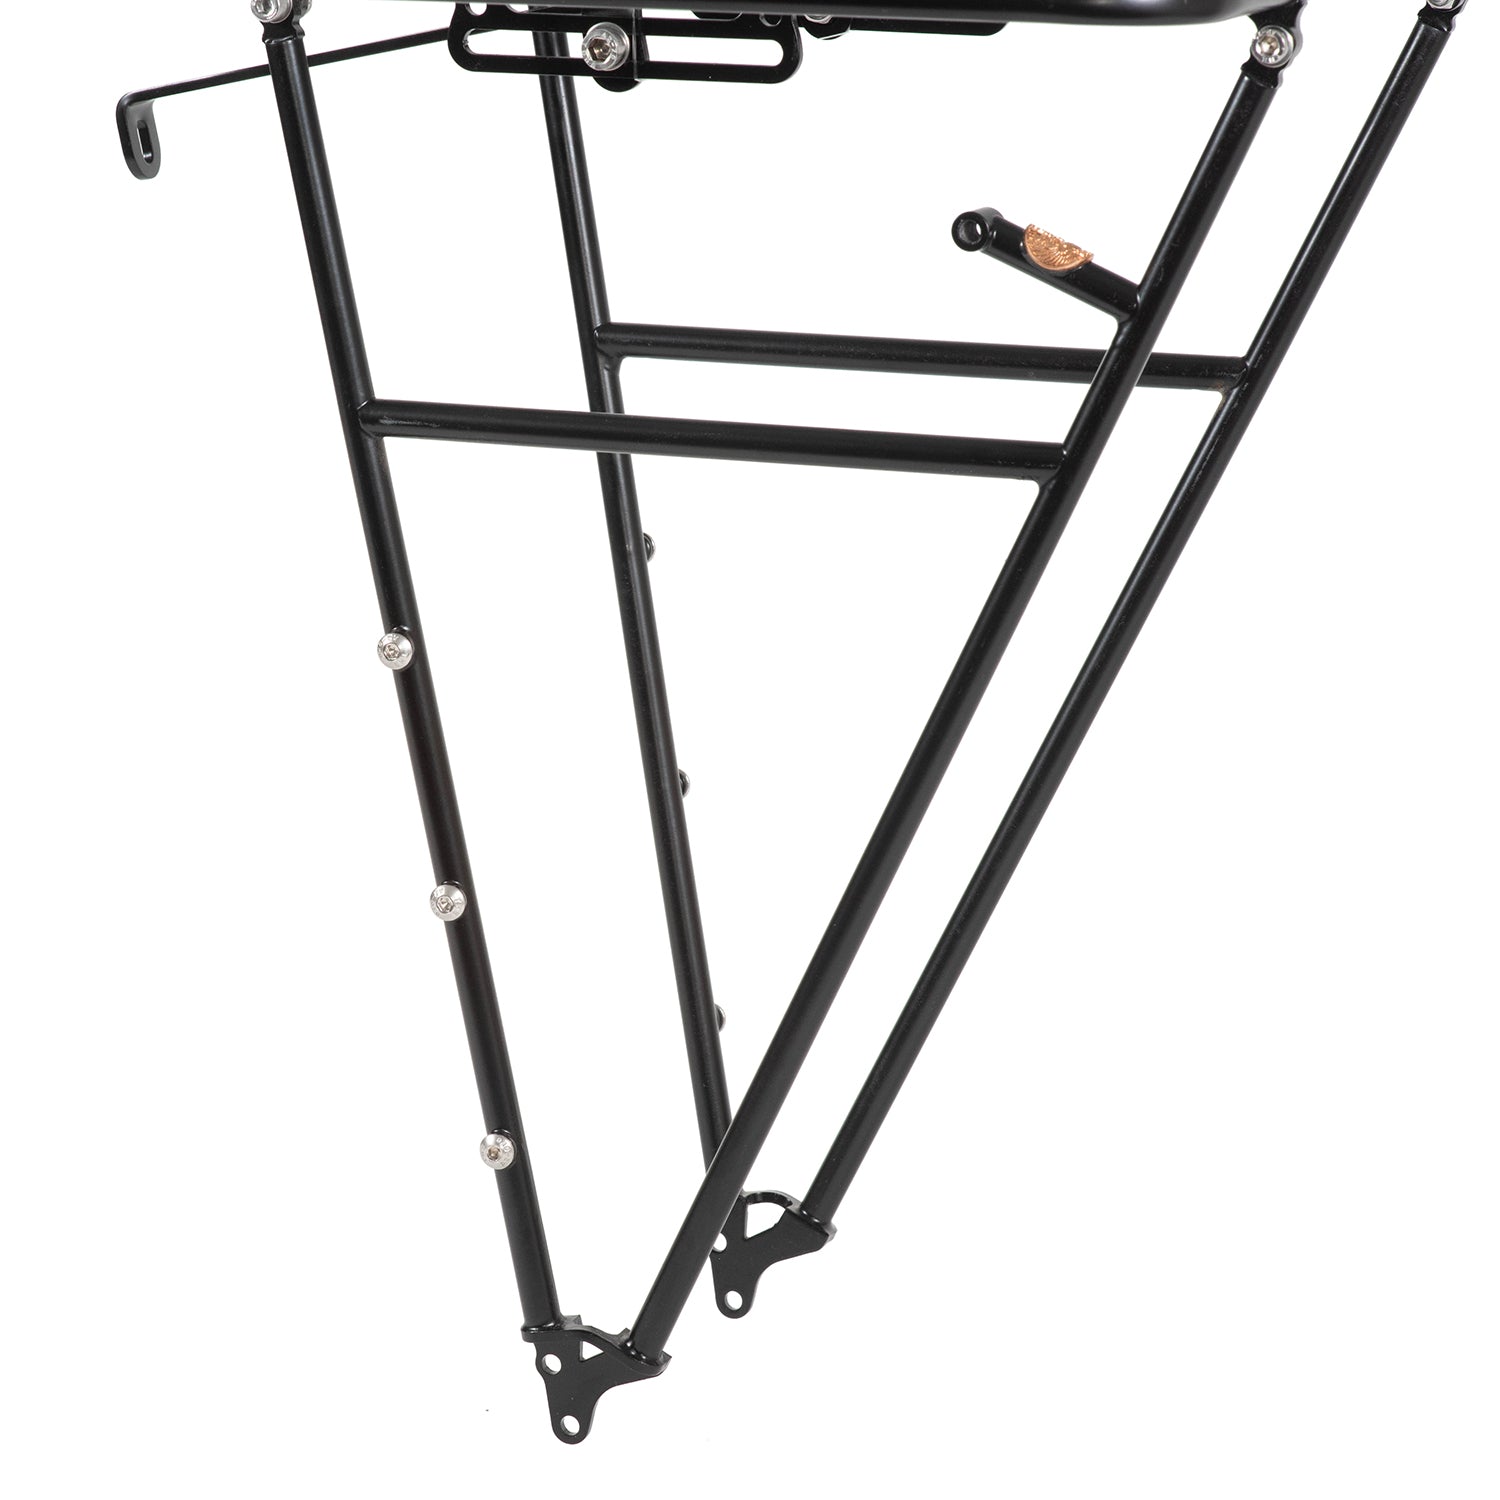 PASS AND STOW 5 Rail Rack (Cargo Cage)